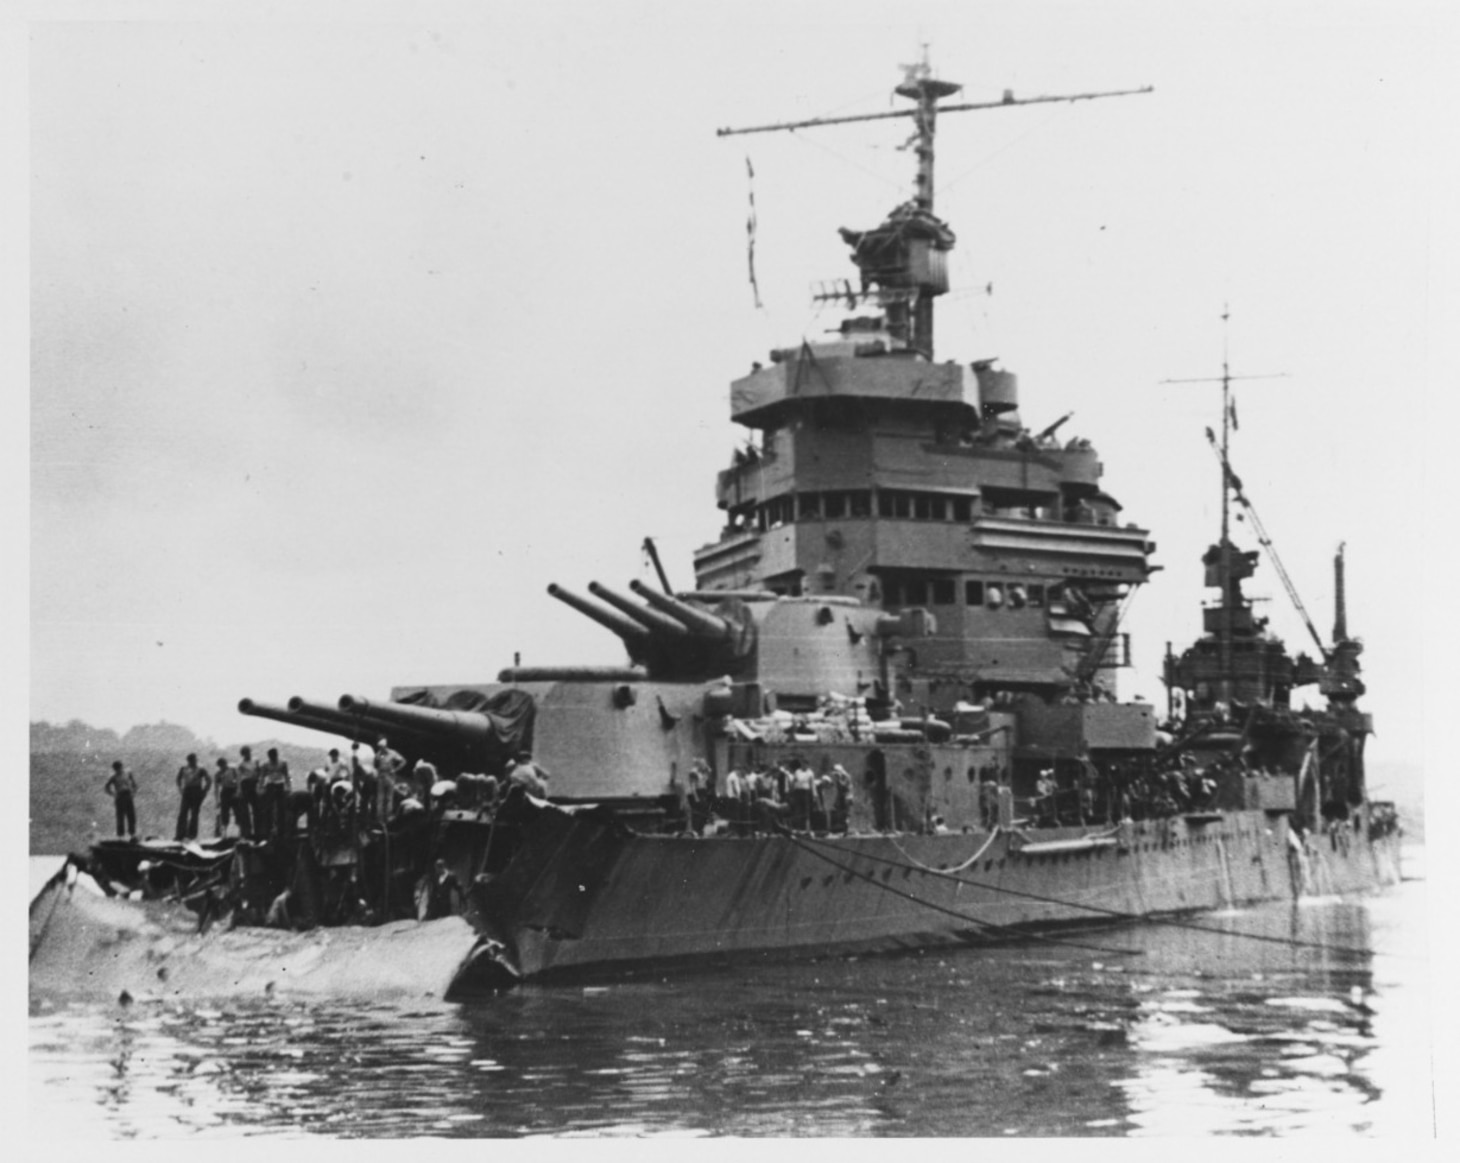 Battle of Tassafaronga, 30 November 1942. USS Minneapolis (CA-36) at Tulagi with torpedo damage received in the battle. Photograph was taken on 01 December 1942, as work began to cut away the wreckage of her bow. Official U.S. Navy Photograph, now in the collections of the U.S. National Archives. (NHHC 80-G-211215)